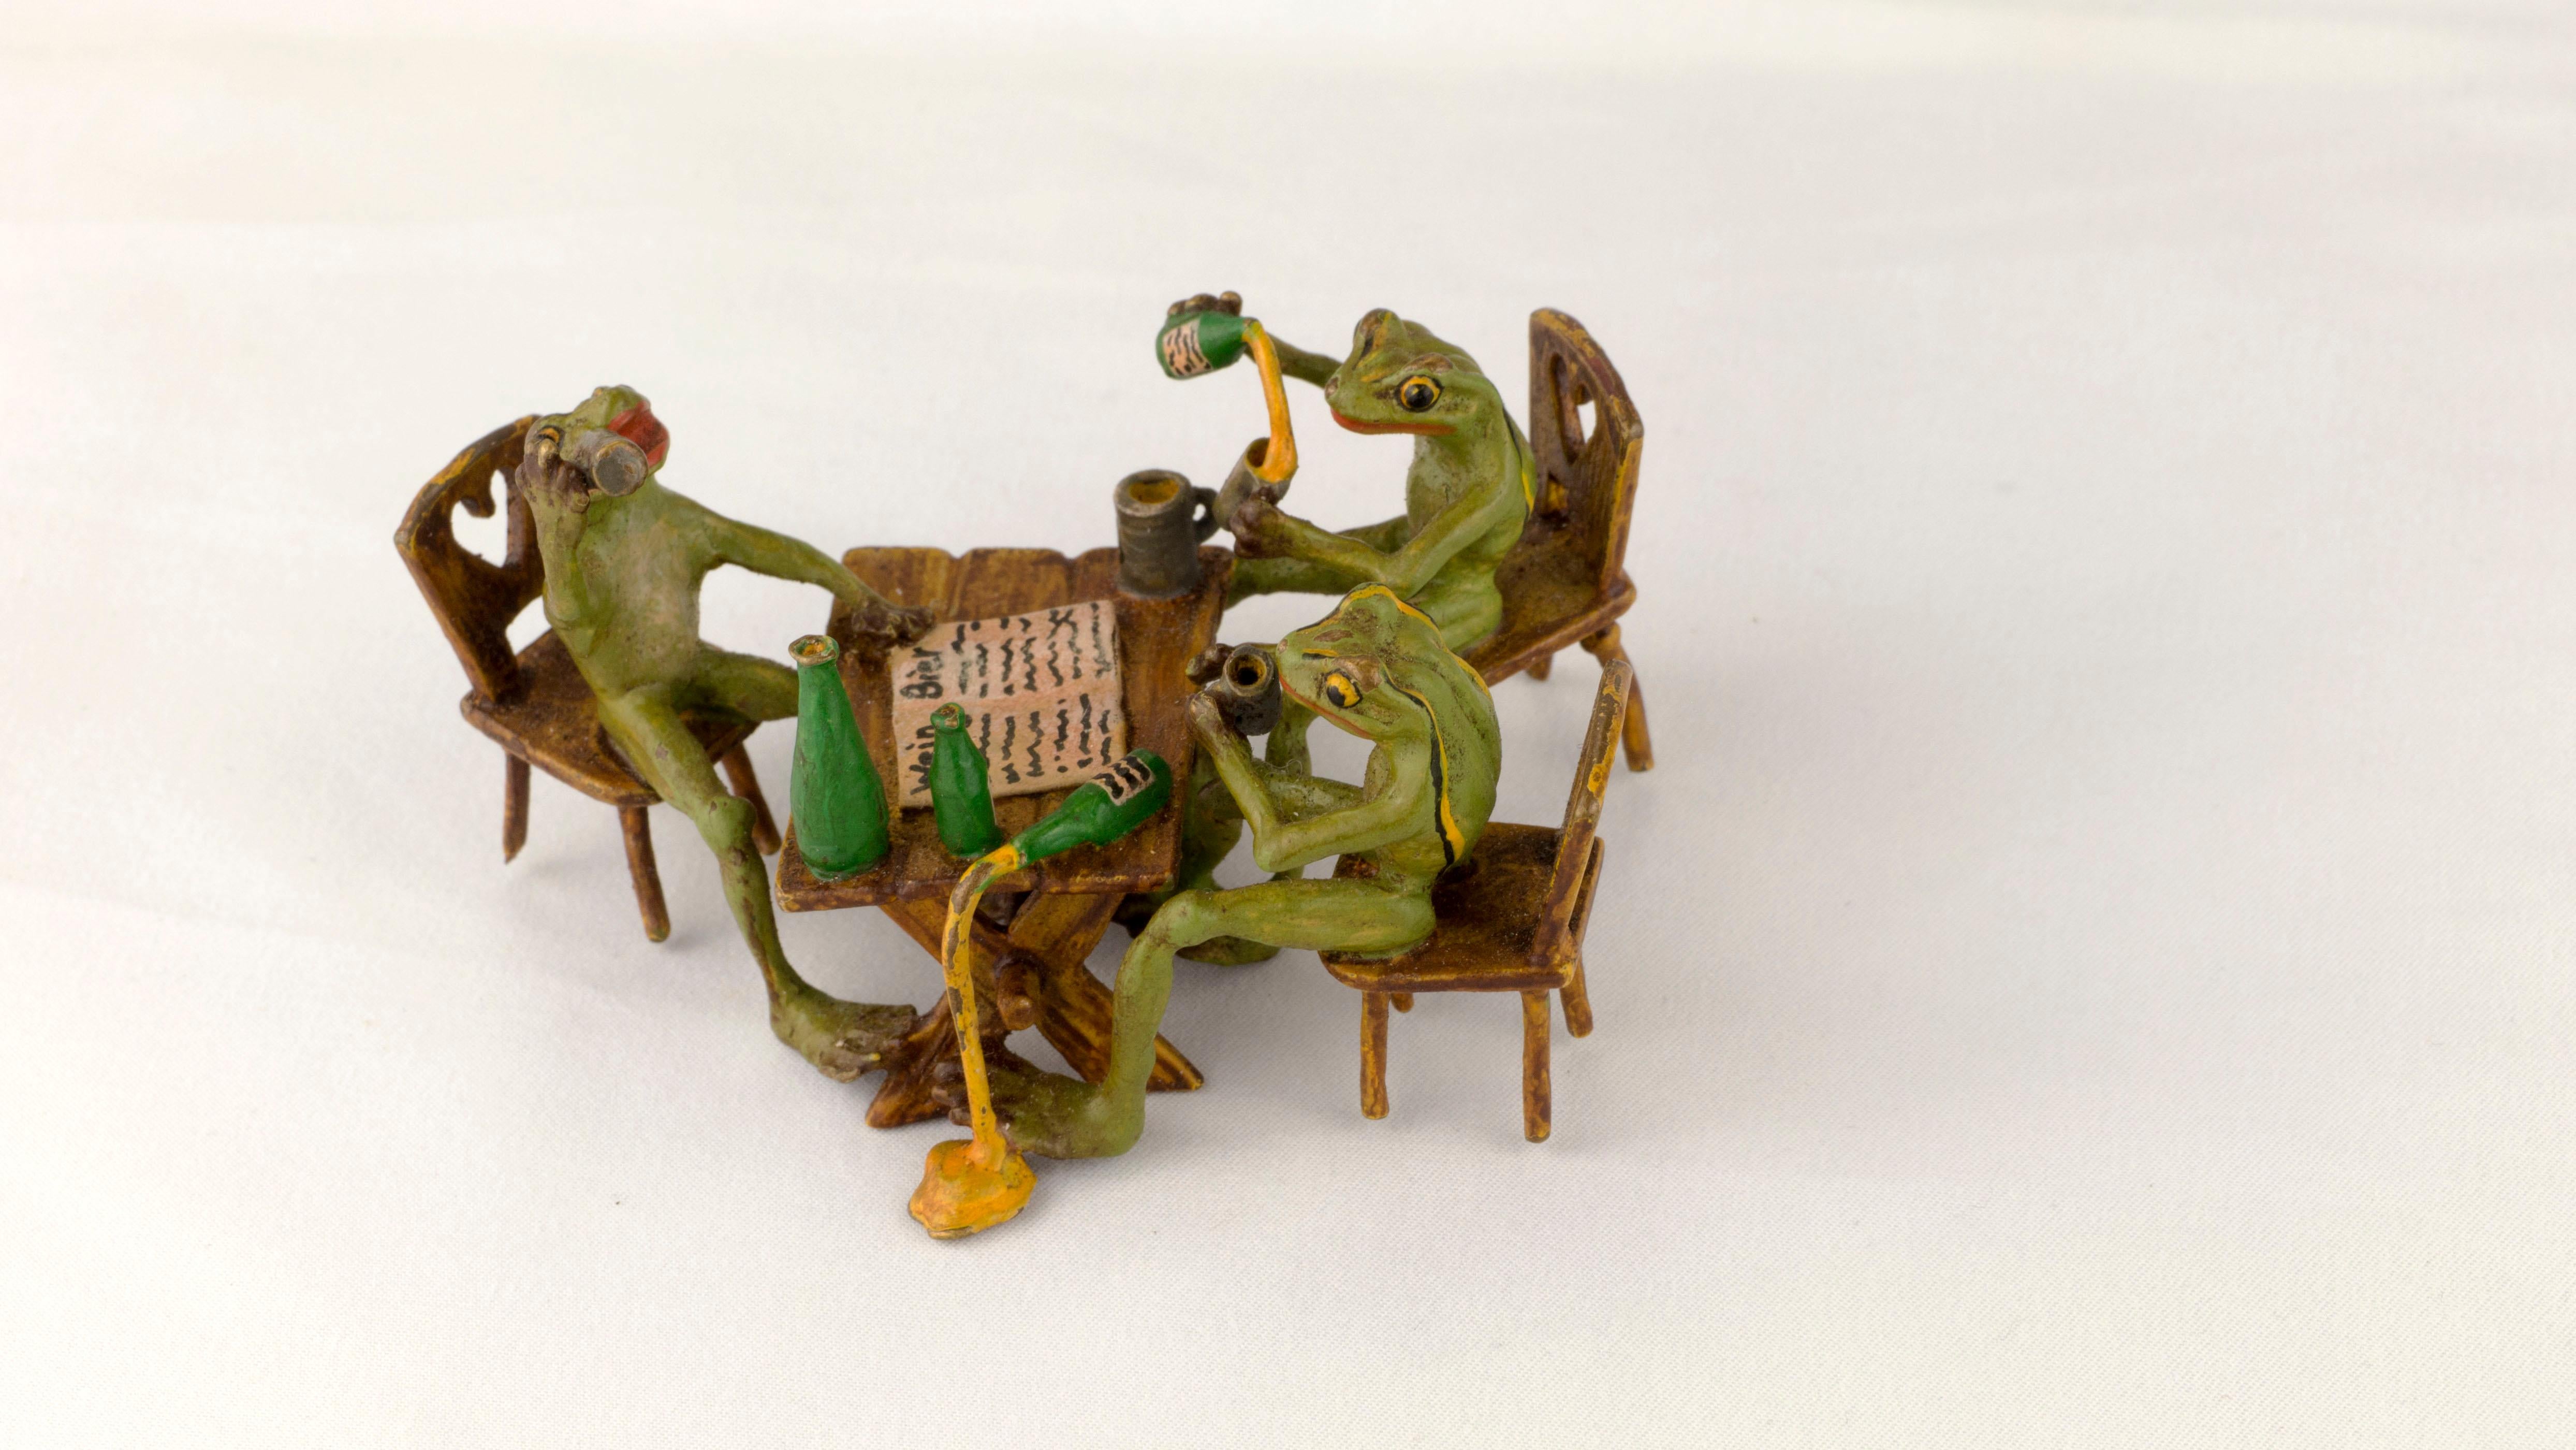 Introducing a charming antique piece, the Gorgeous Vienna Bronze Figurine Group, crafted by the renowned Bergman(n) manufactory during the late 19th century, circa 1890-1900.

The figurine group depicts three playful frogs gathered around a square